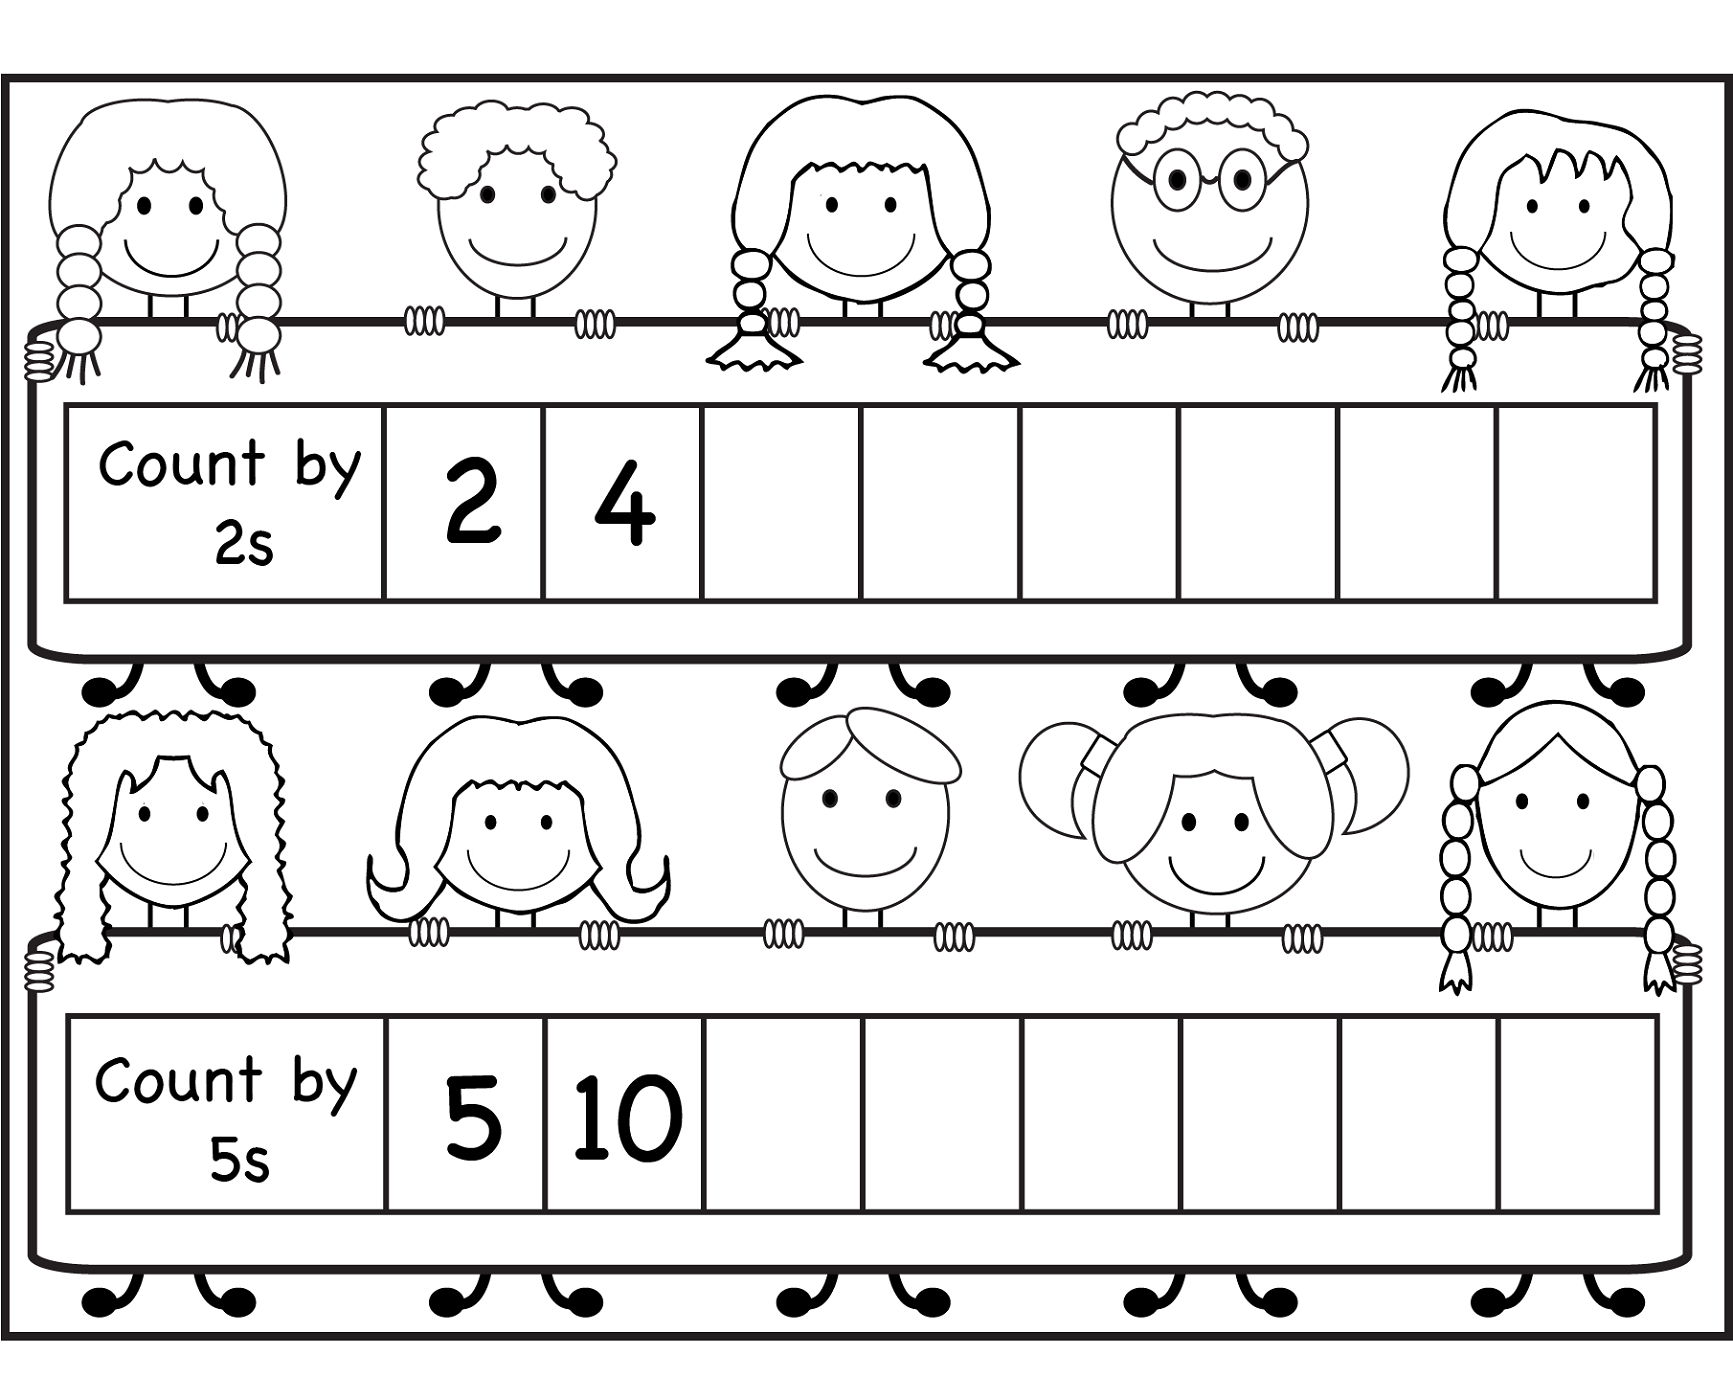 count by 2s worksheet for school